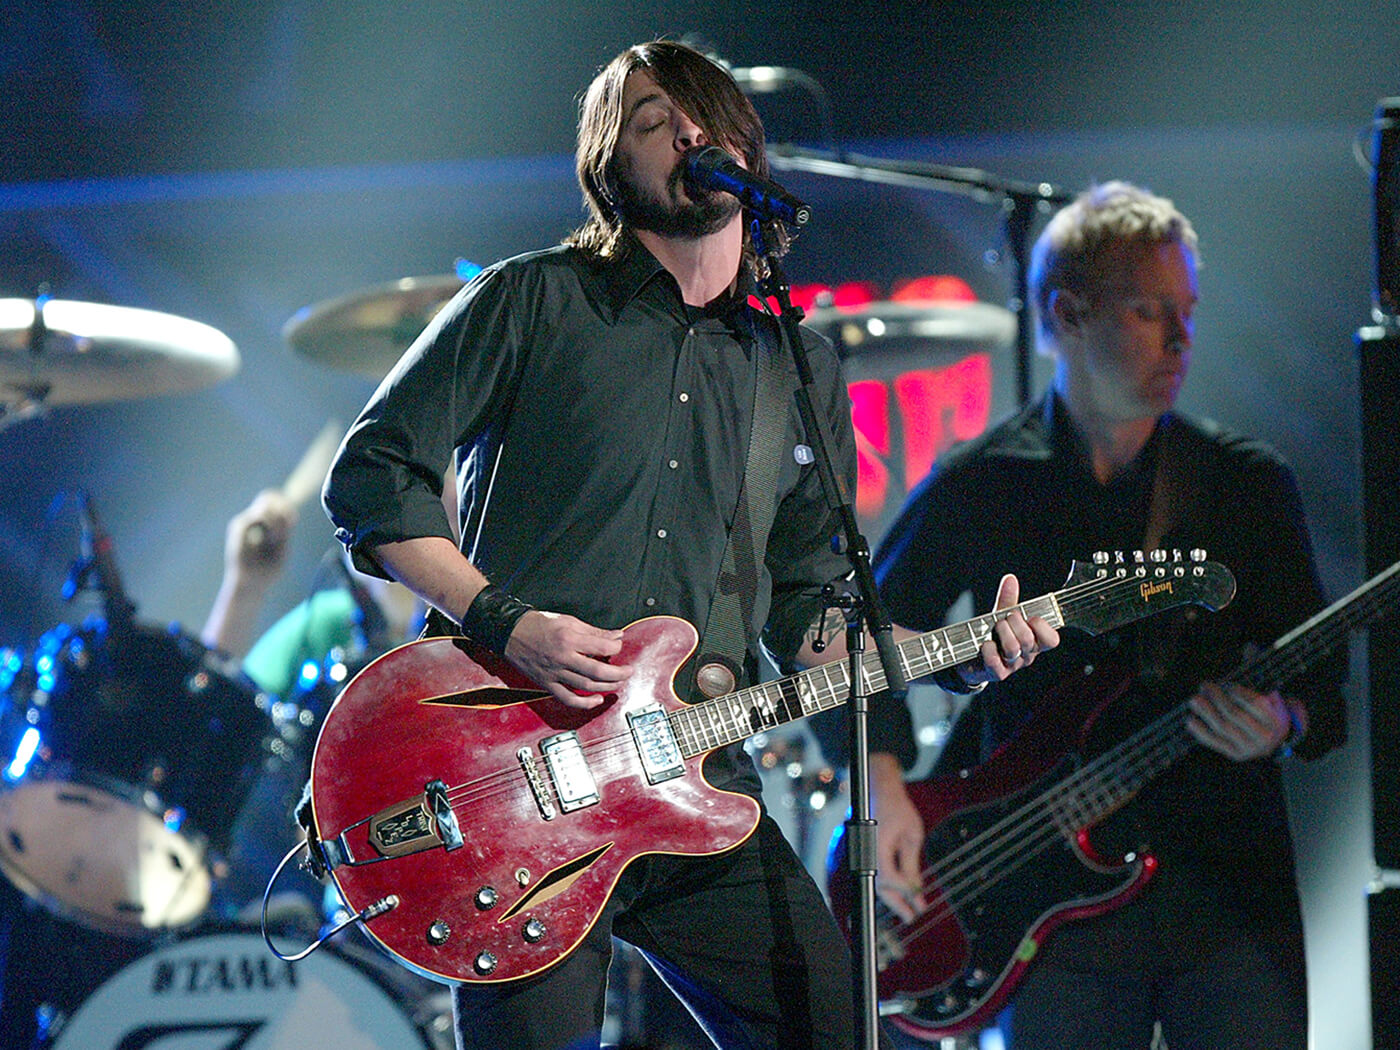 Dave Grohl performing with the Foo Fighters in 2004. He plays his red 1967 Trini Lopez signature Gibson guitar, photo by Frank Micelotta/Getty Images